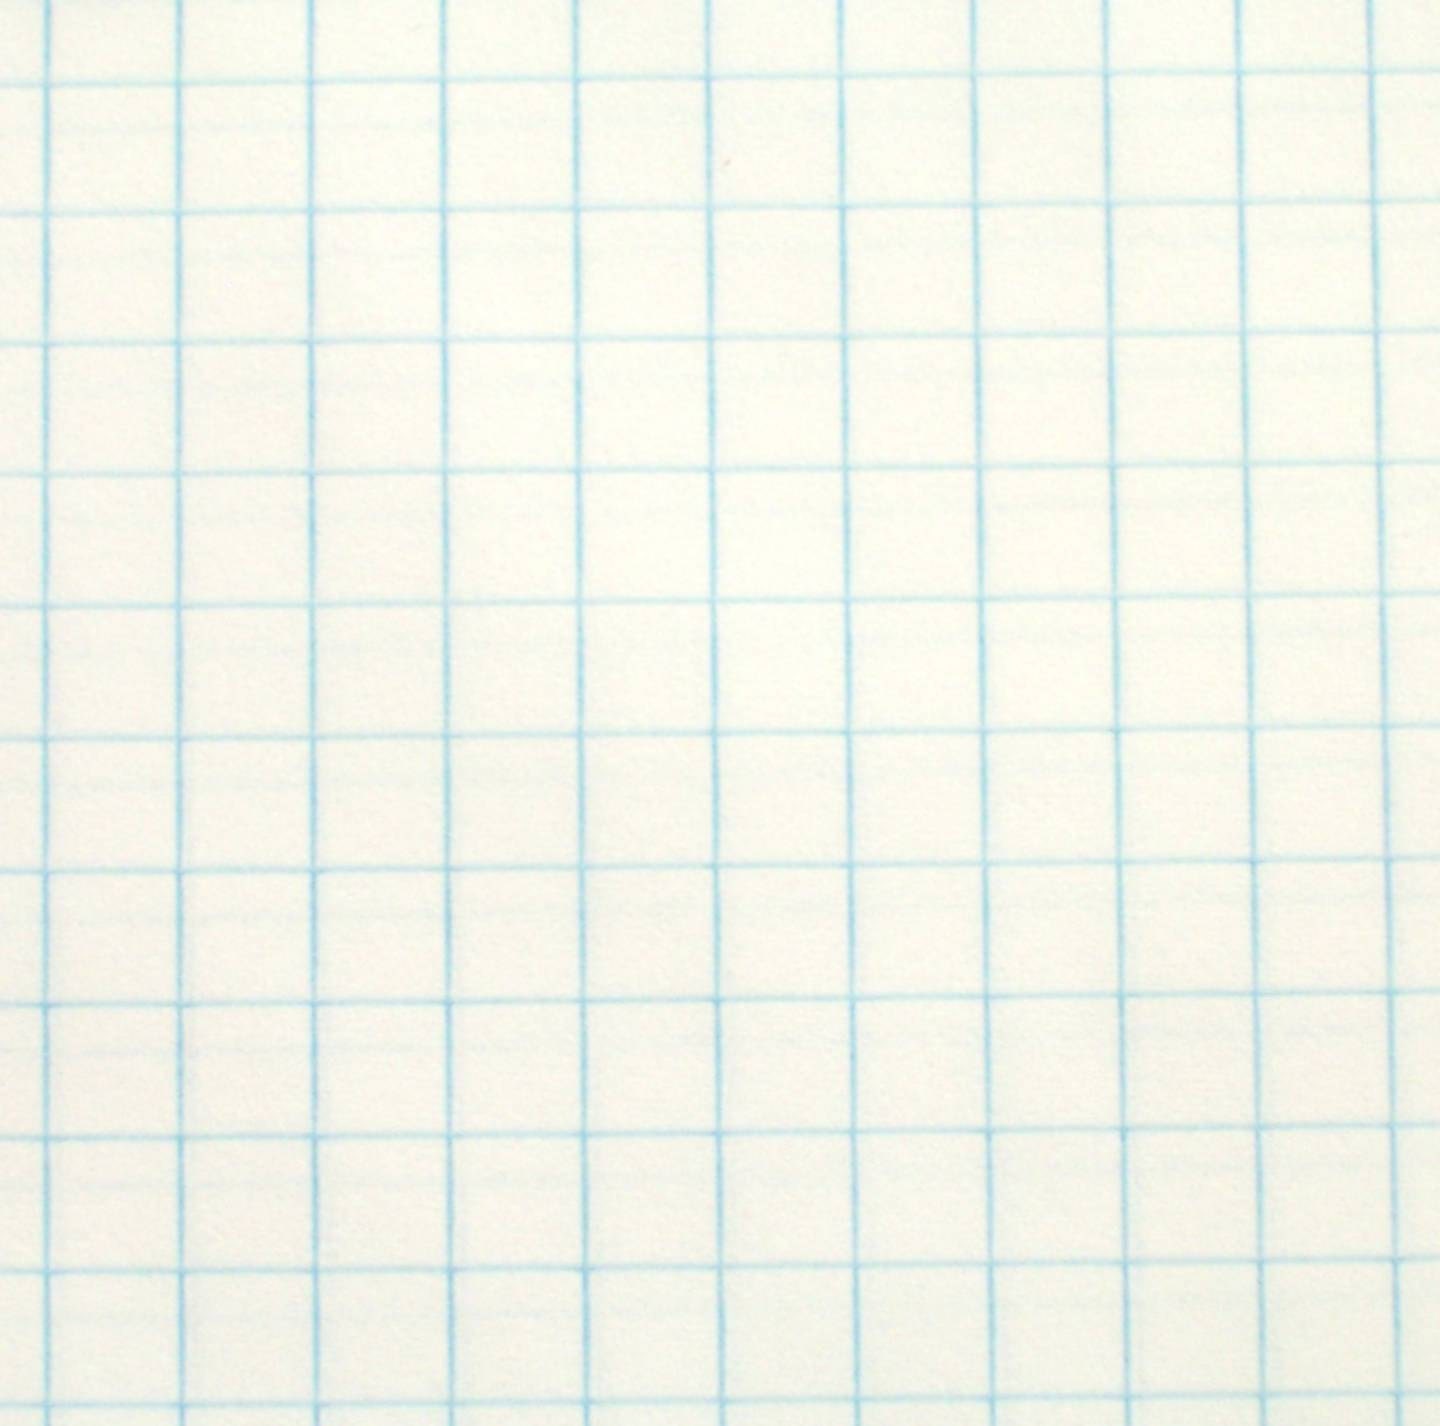 graphing notebook